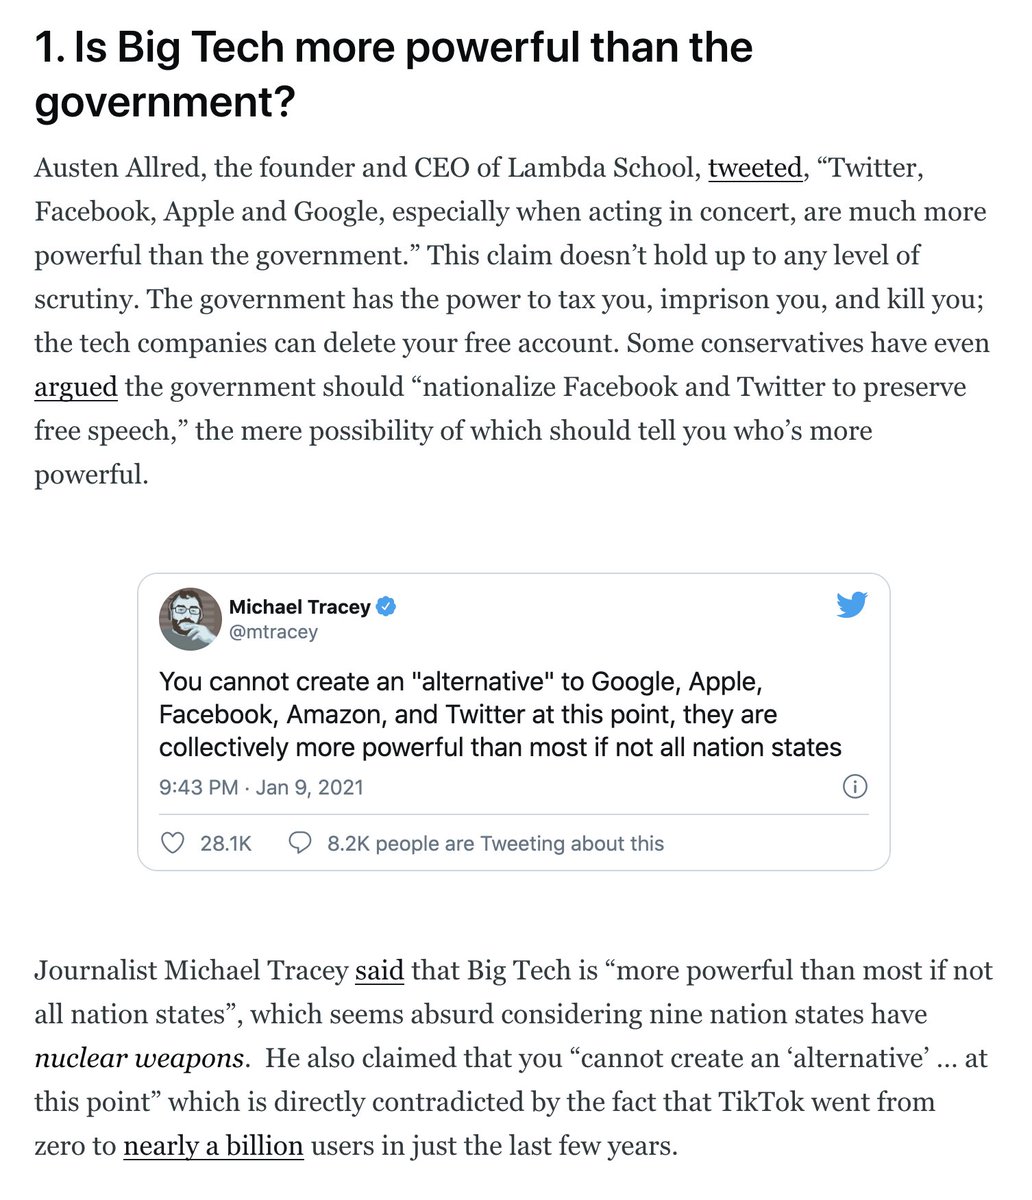 1. Contrary to what many people have been claiming, no, Big Tech is not more powerful than the government.The government can tax you, imprison you, and kill you. It can even nationalize private companies.Tech companies can delete your free account.